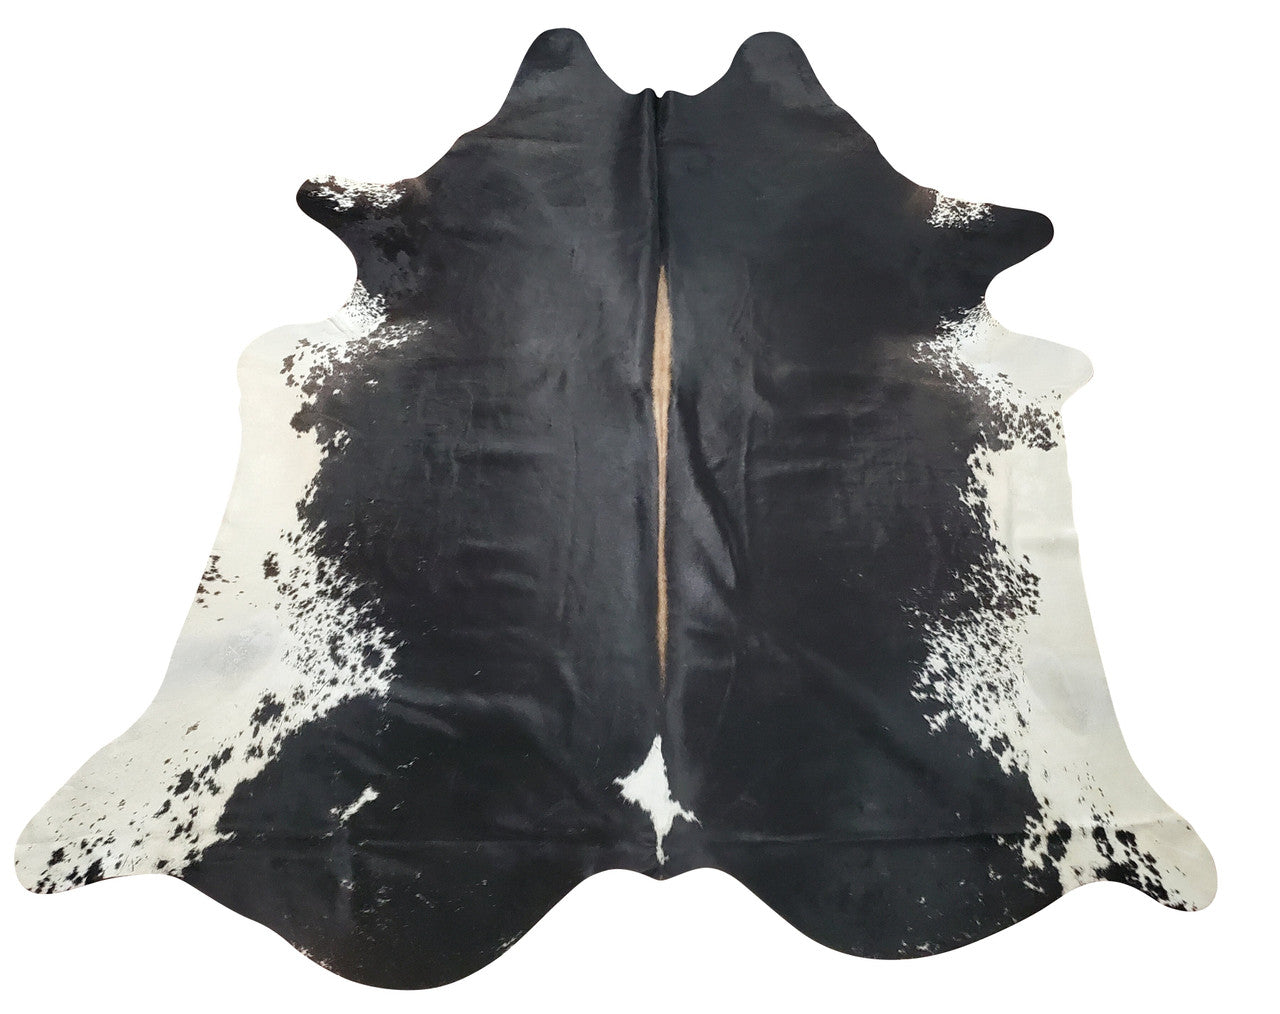 Brazilian black white cowhide rugs can be a functional and decorative addition to any living room, comes in endless solid and salt pepper patterns.